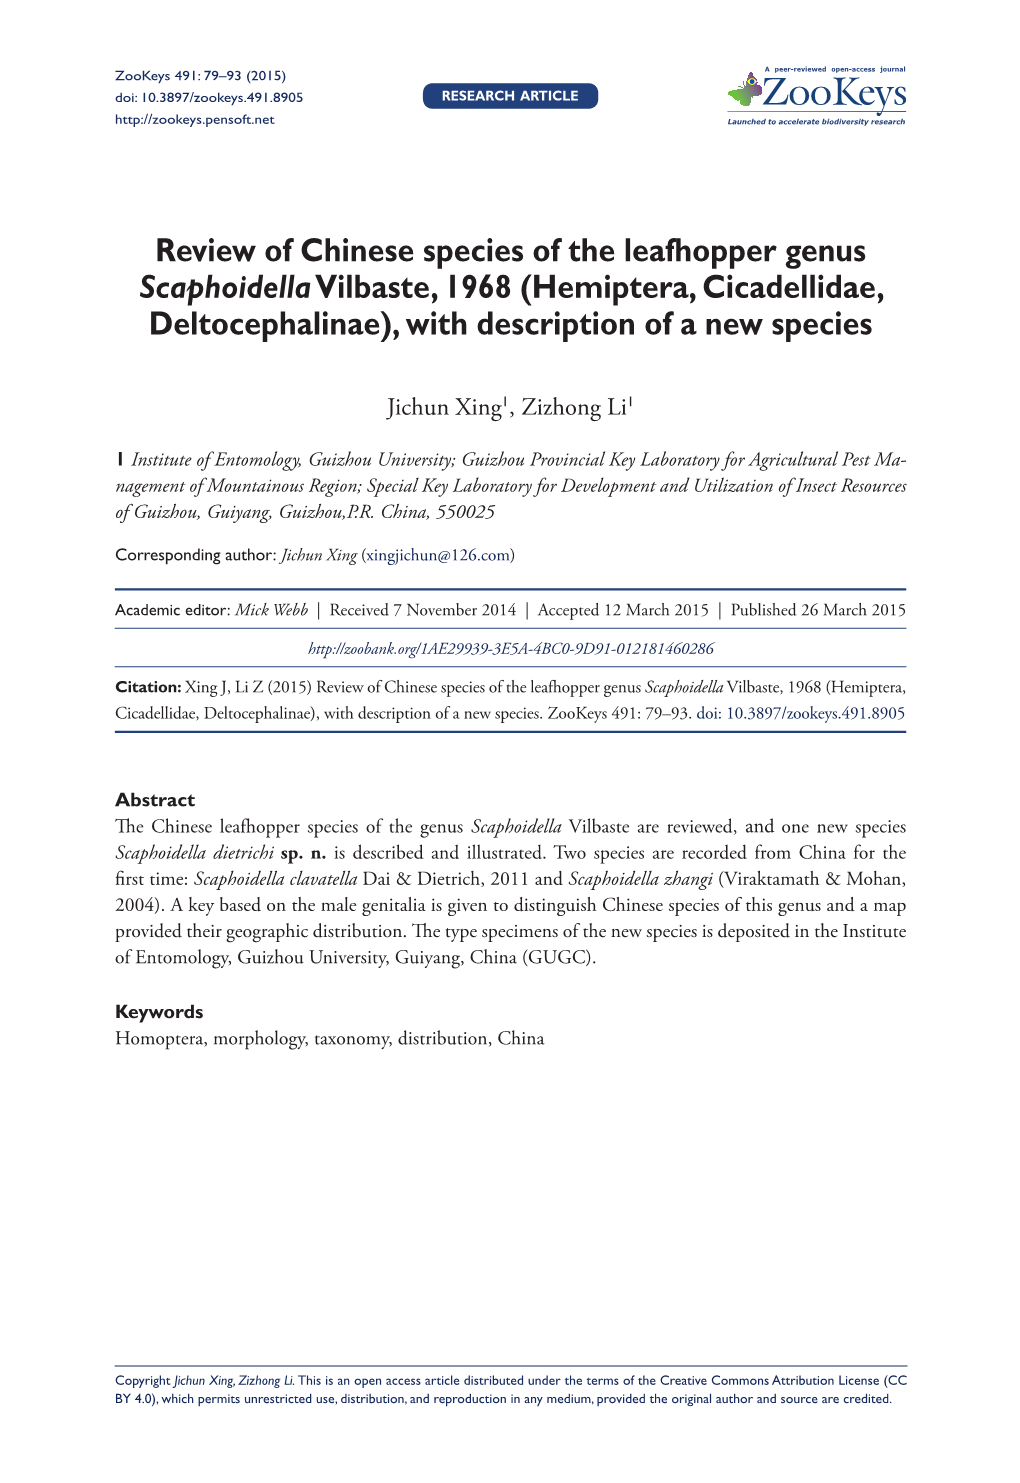 ﻿Review of Chinese Species of the Leafhopper Genus Scaphoidella